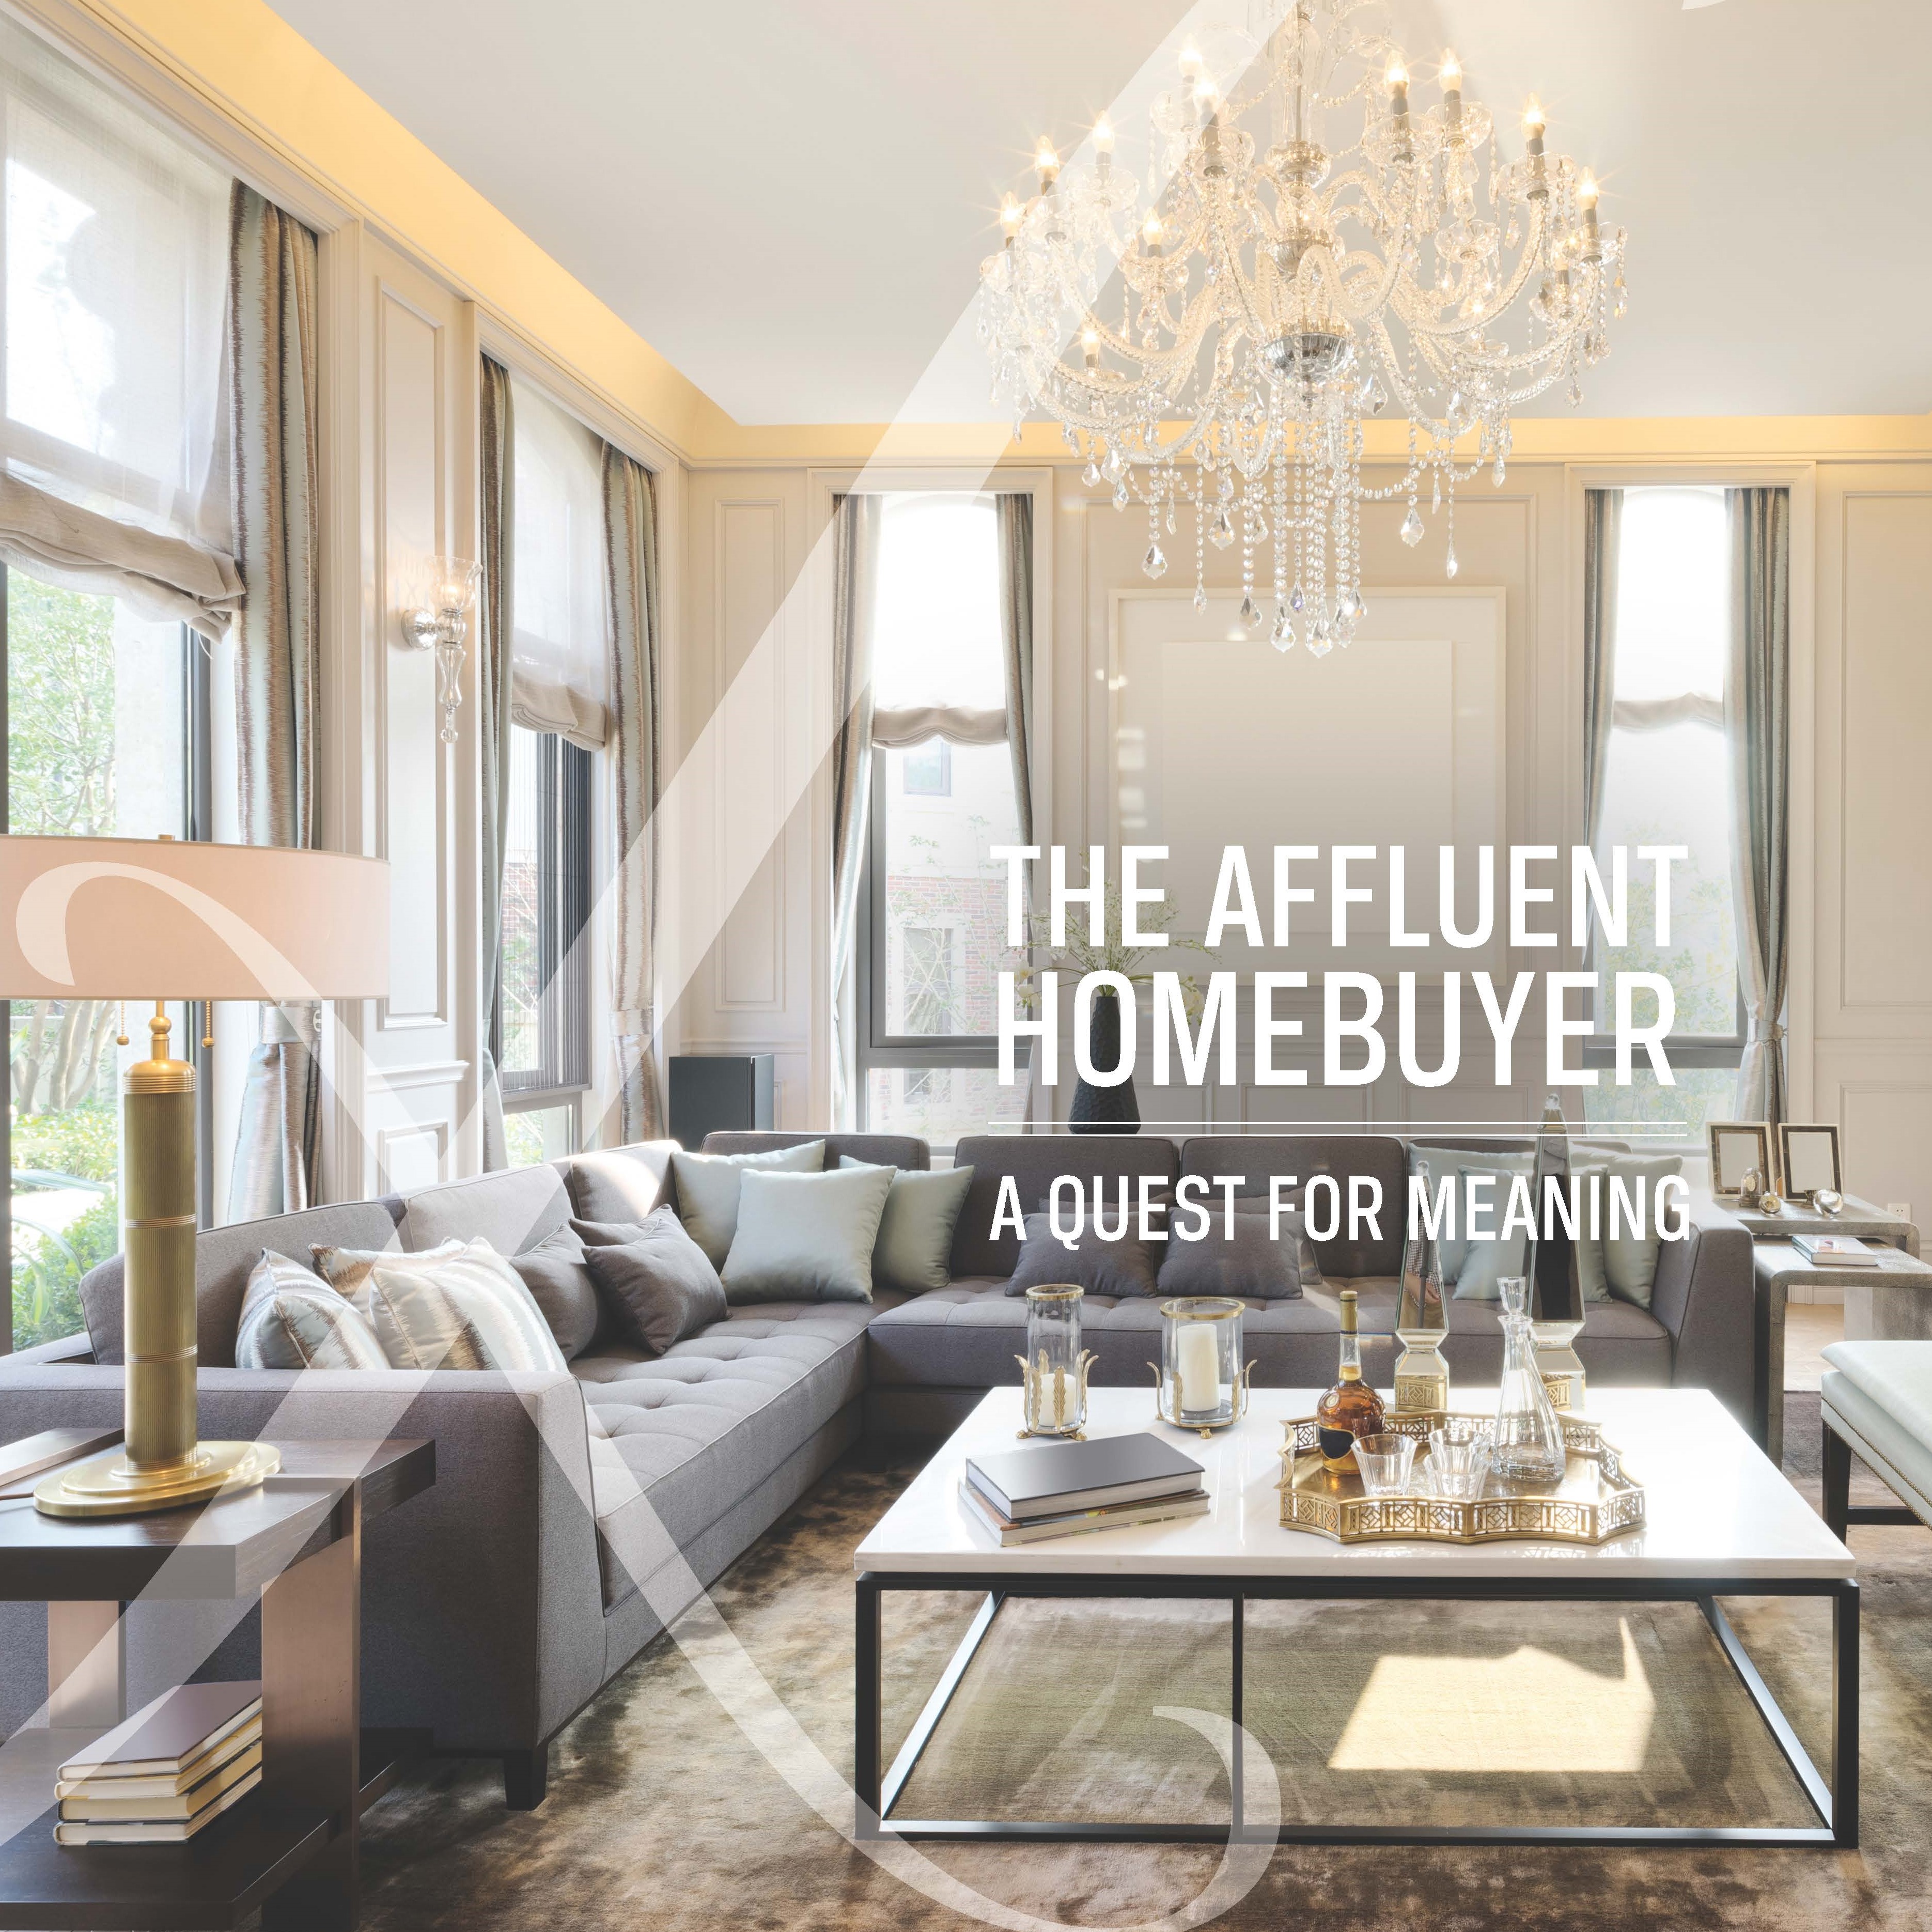 The Affluent Home Buyer - A Quest For Meaning